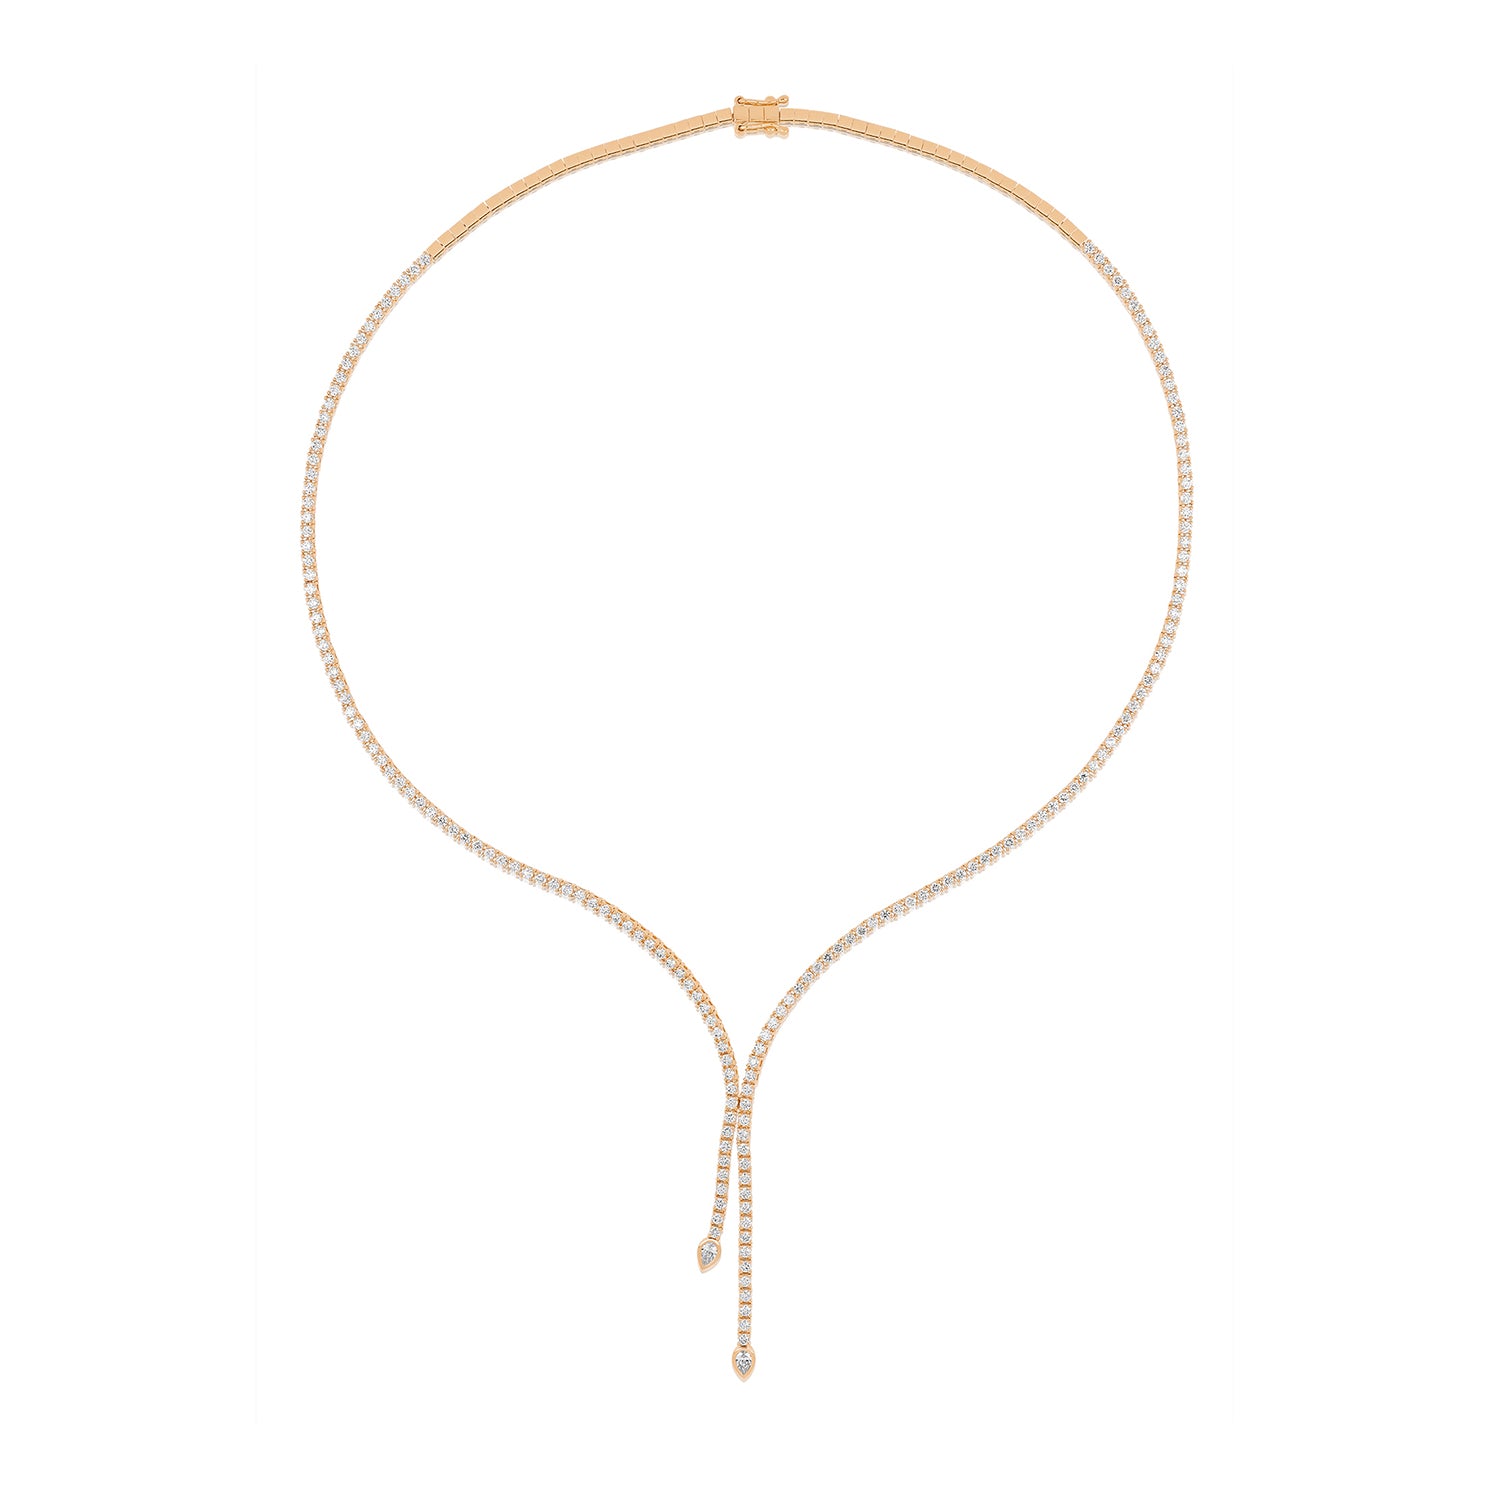 Diamond Lily Necklace in 14k rose gold